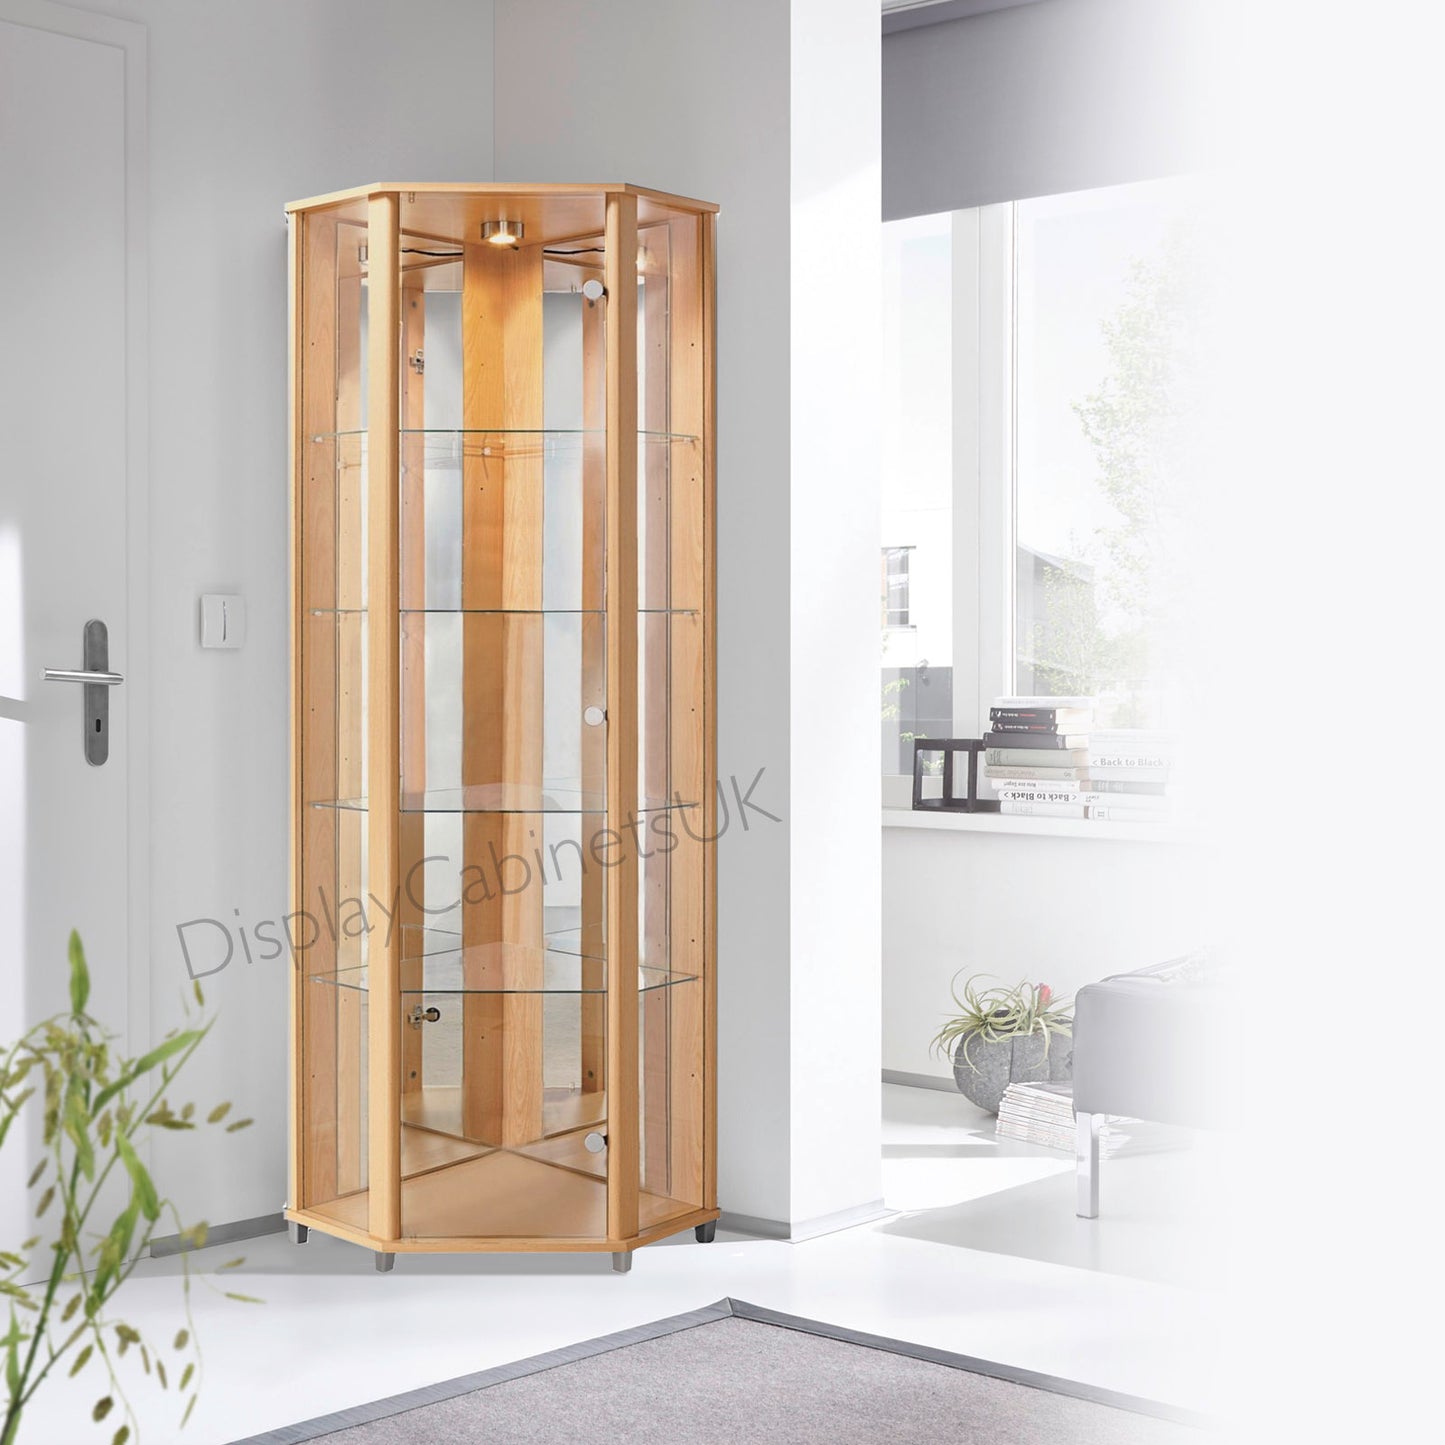 Home Beech Glass Display Cabinets: Single, Double or Corner